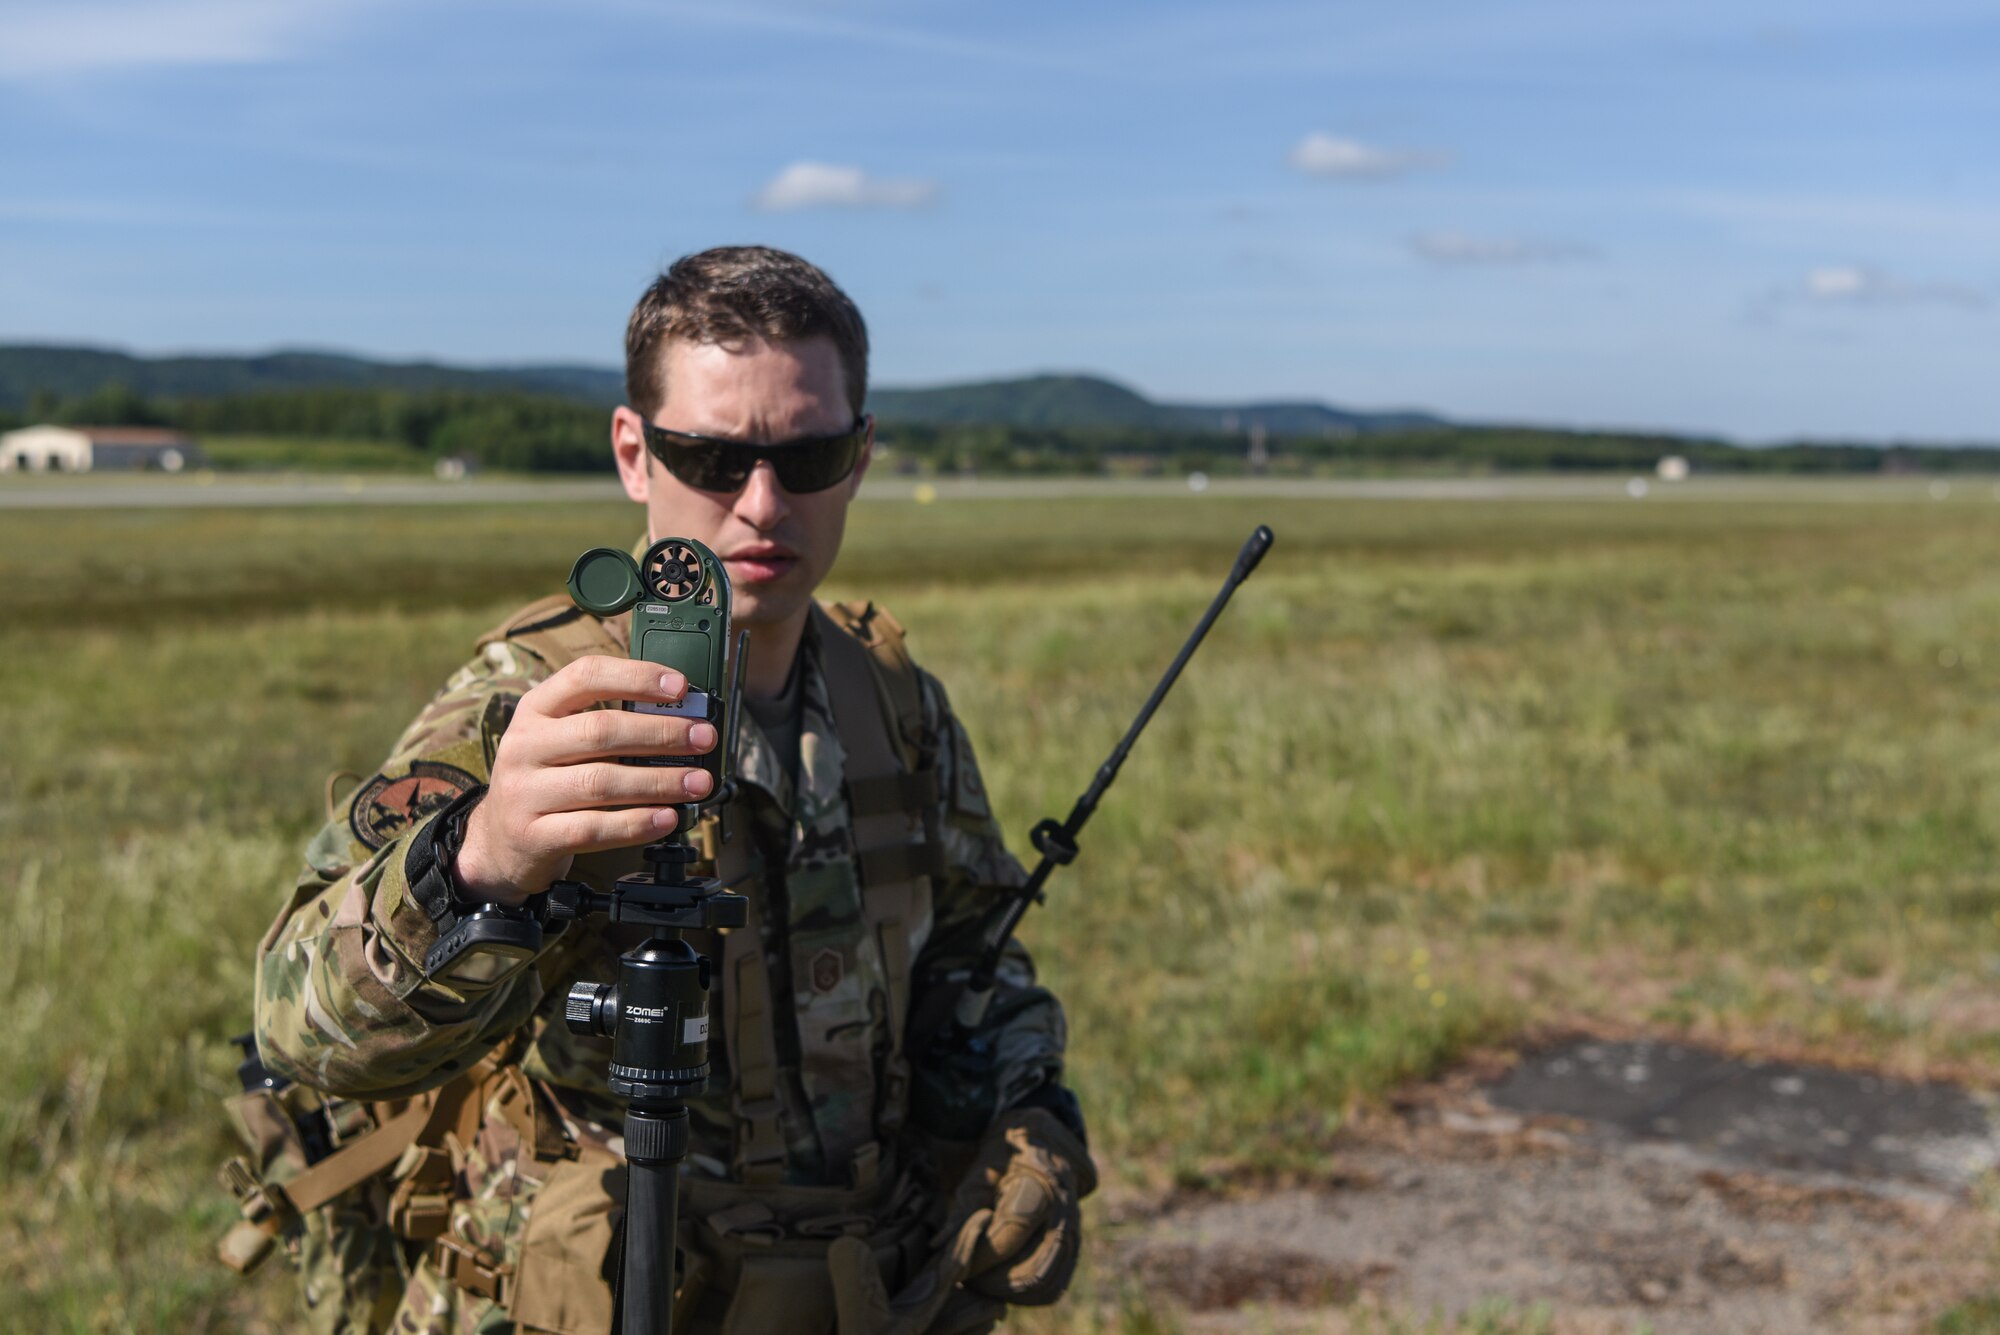 Photo of Airman using an anemometer